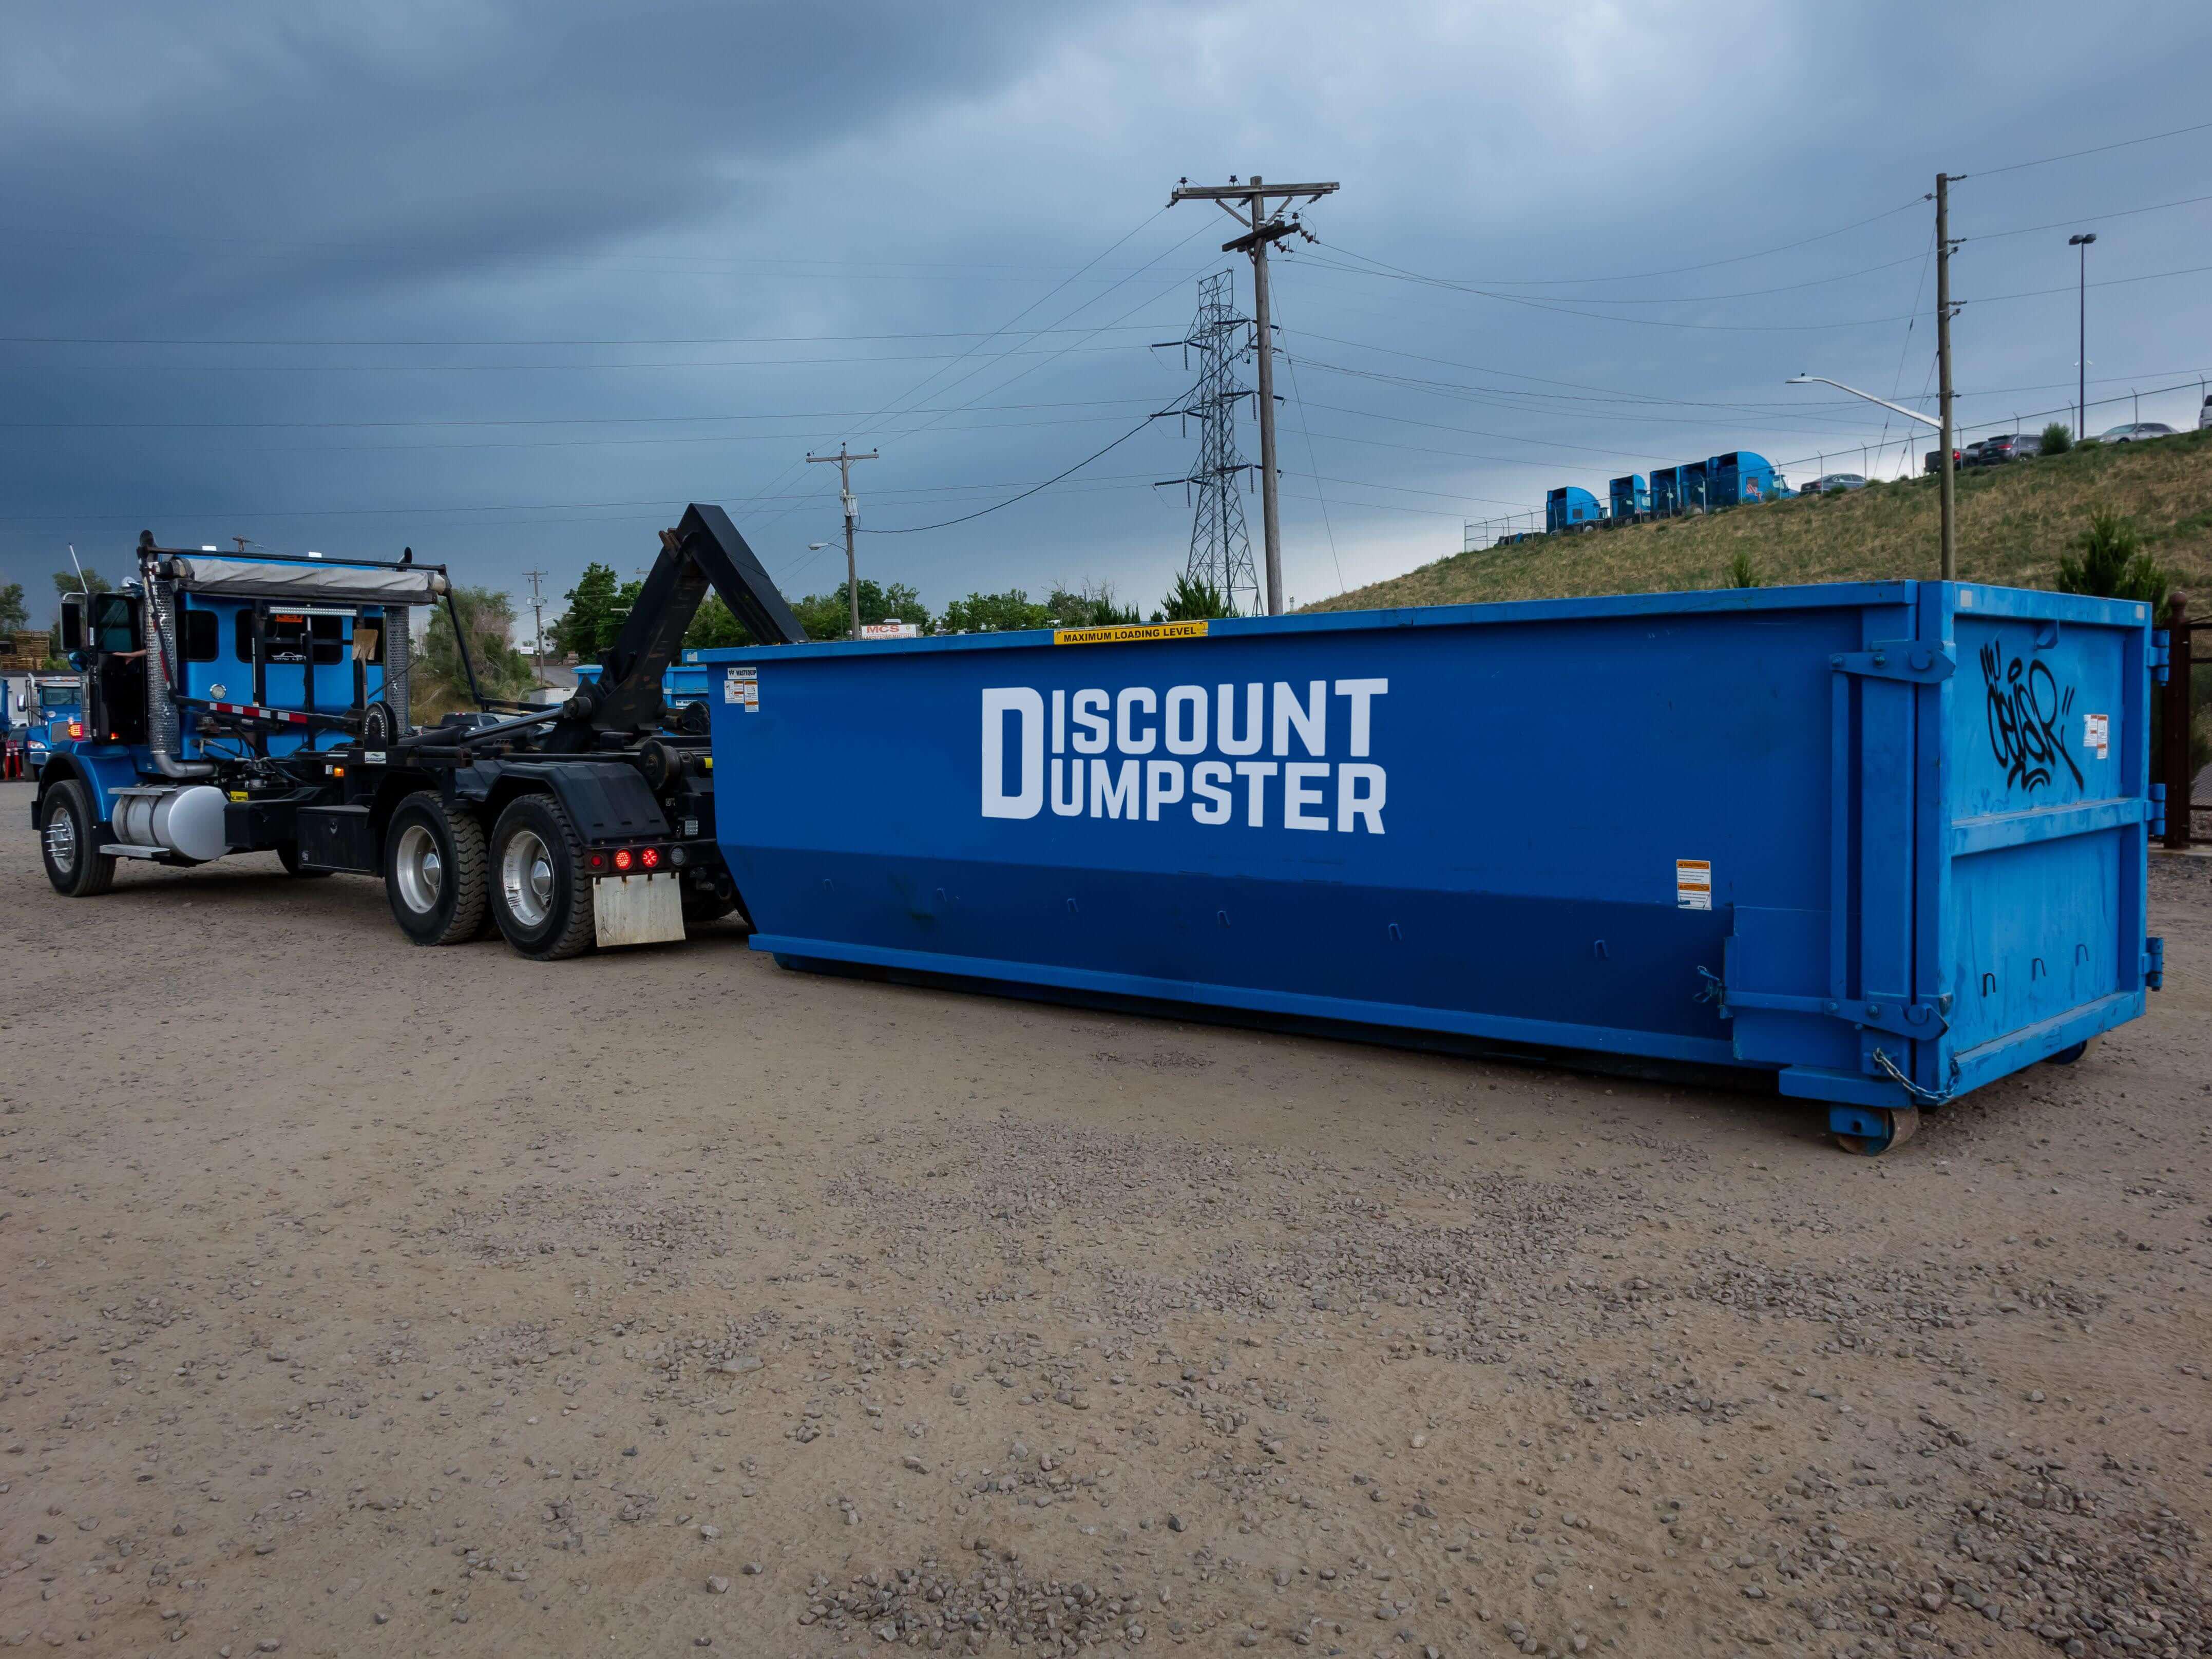 Discount dumpster has roll off dumpsters for commercial and home use in chicago il Discount Dumpster Chicago (312)549-9198